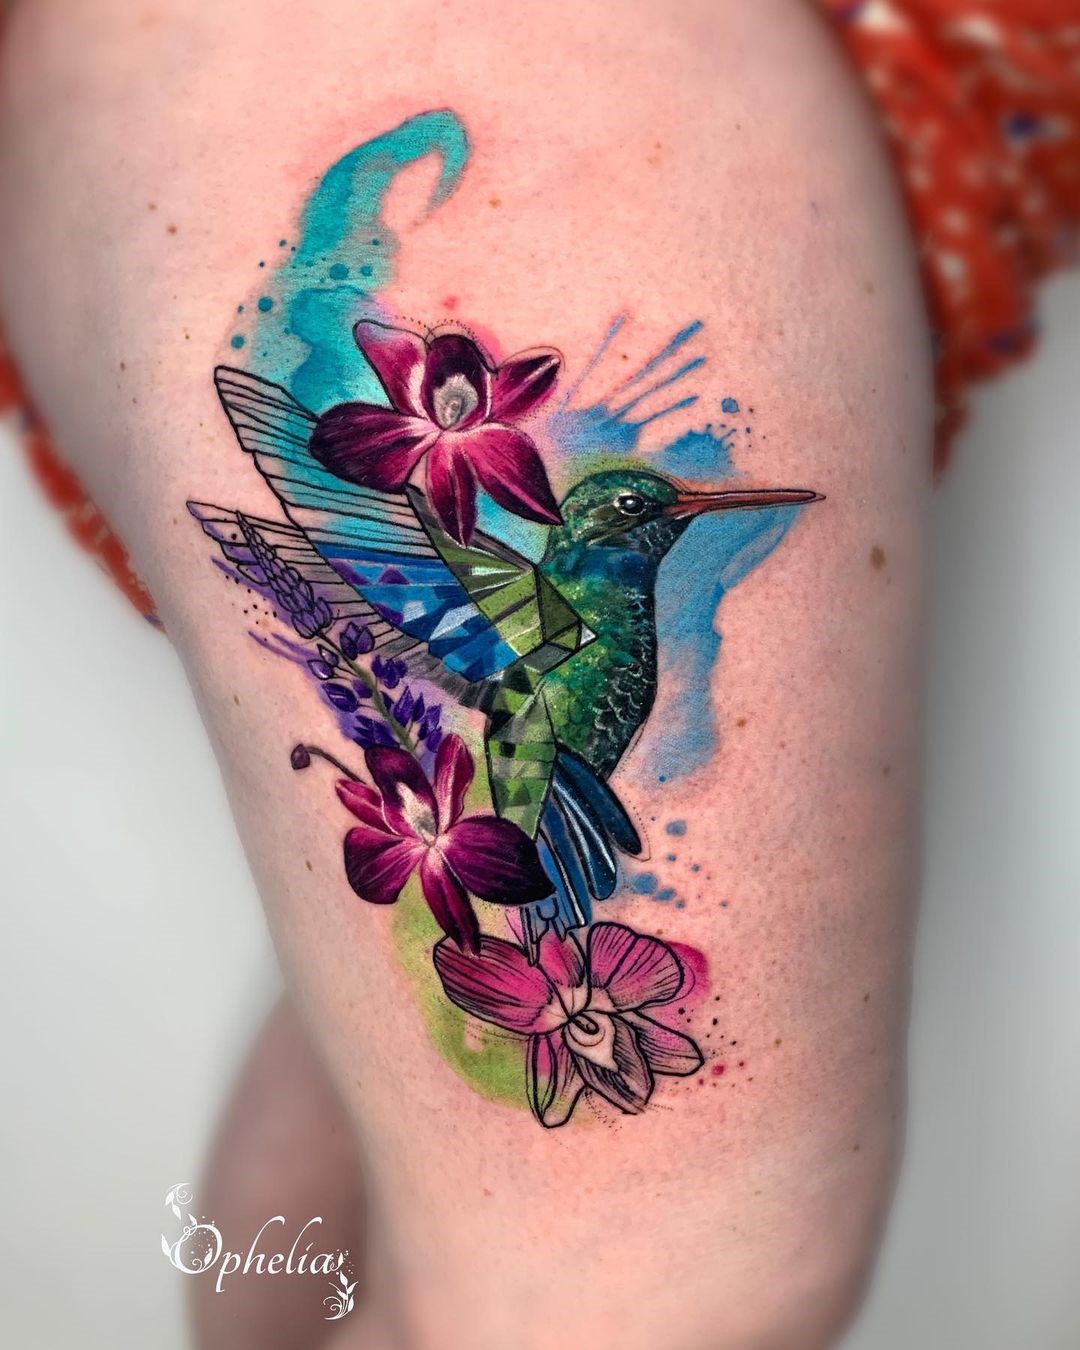 Aster Flower Tattoo With A Bird Image